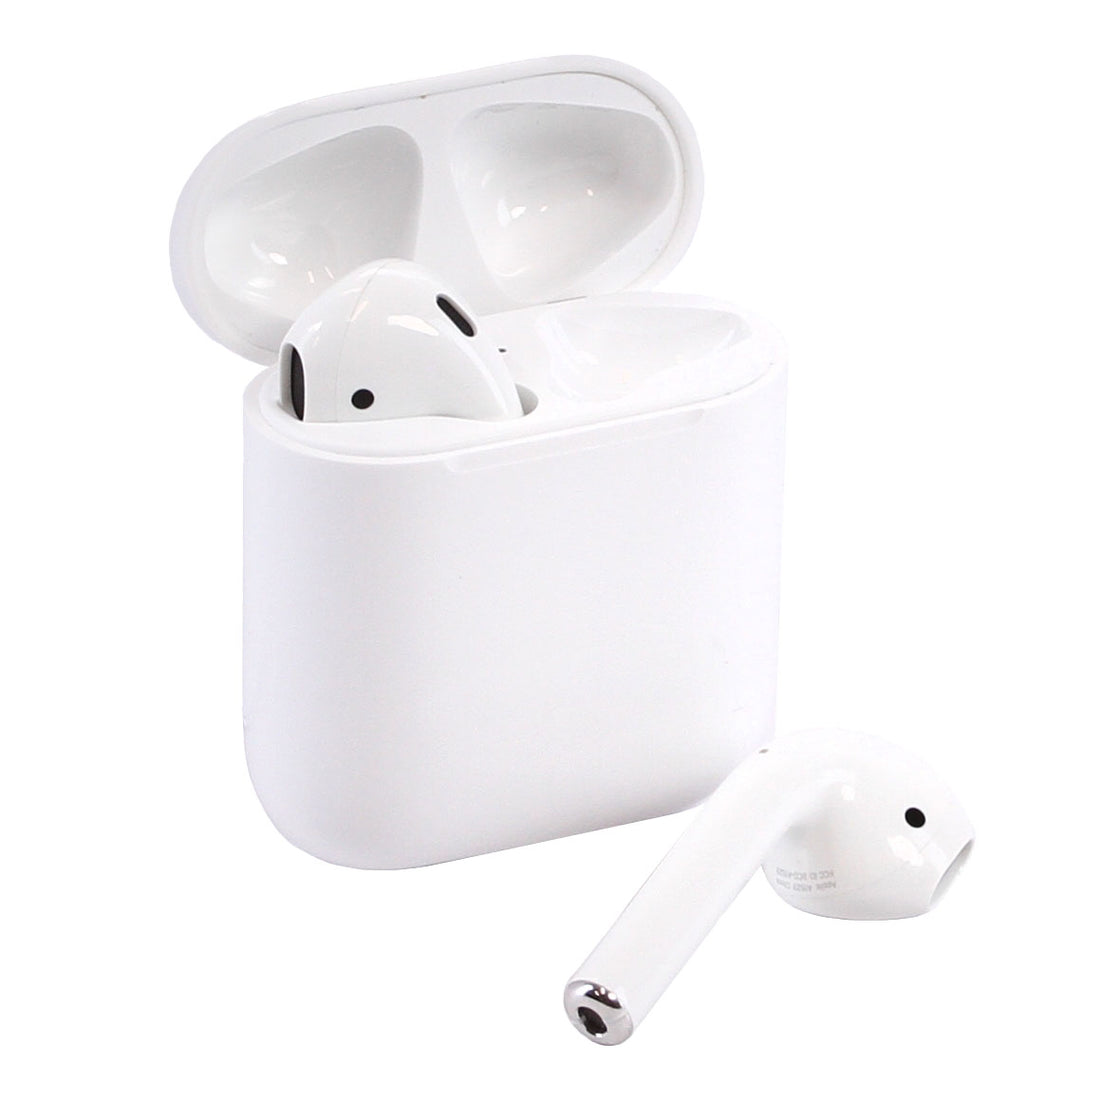 Apple AirPods 2 with Charging Case - White (Certified Refurbished)